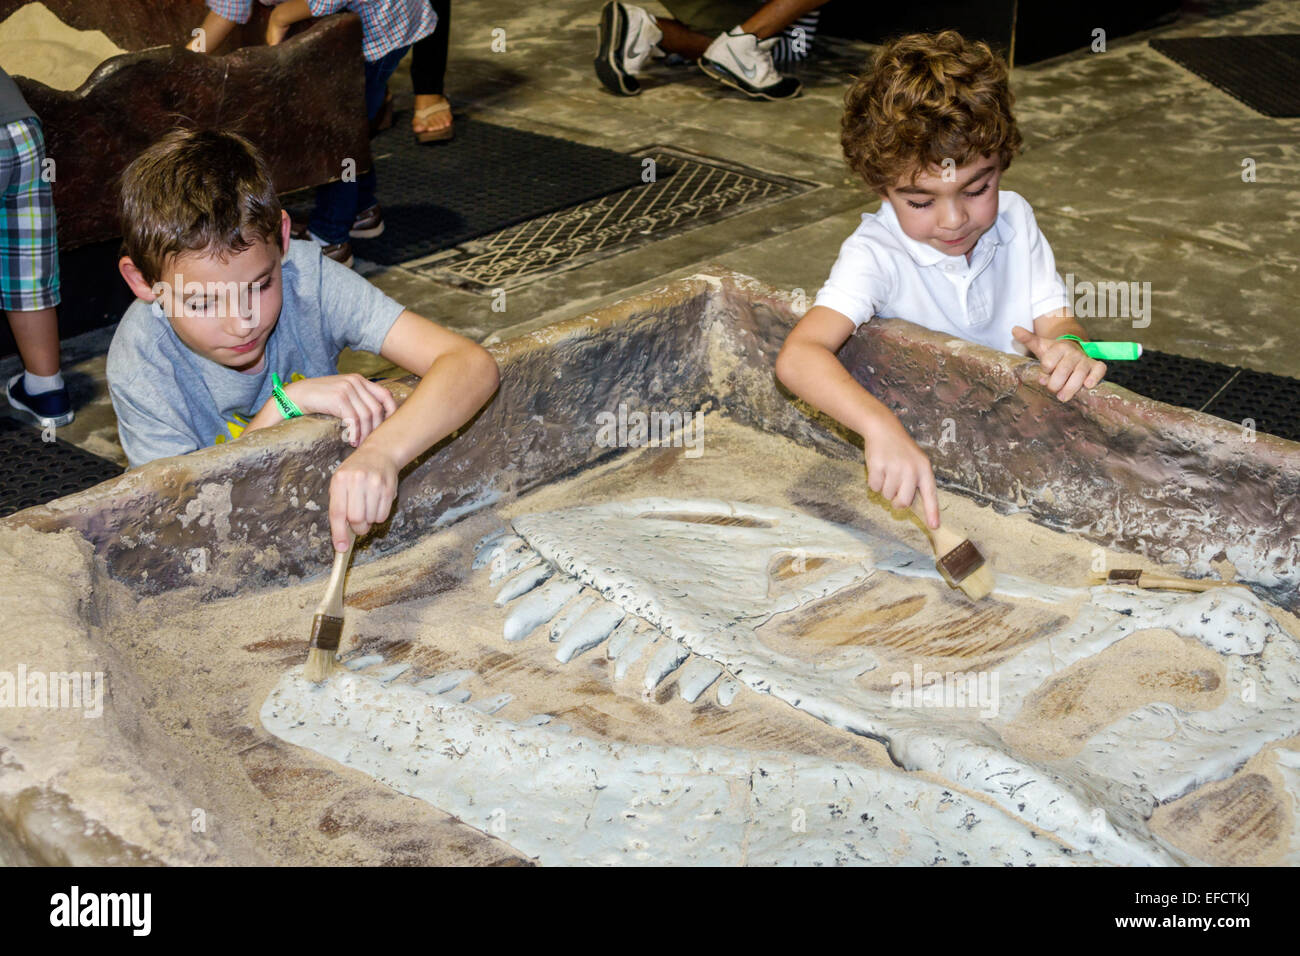 Miami Beach Florida,Convention Center,centre,Discover the Dinosaurs,life-like,hands-on,male boy boys kids children brushing off sand,archeological dig Stock Photo